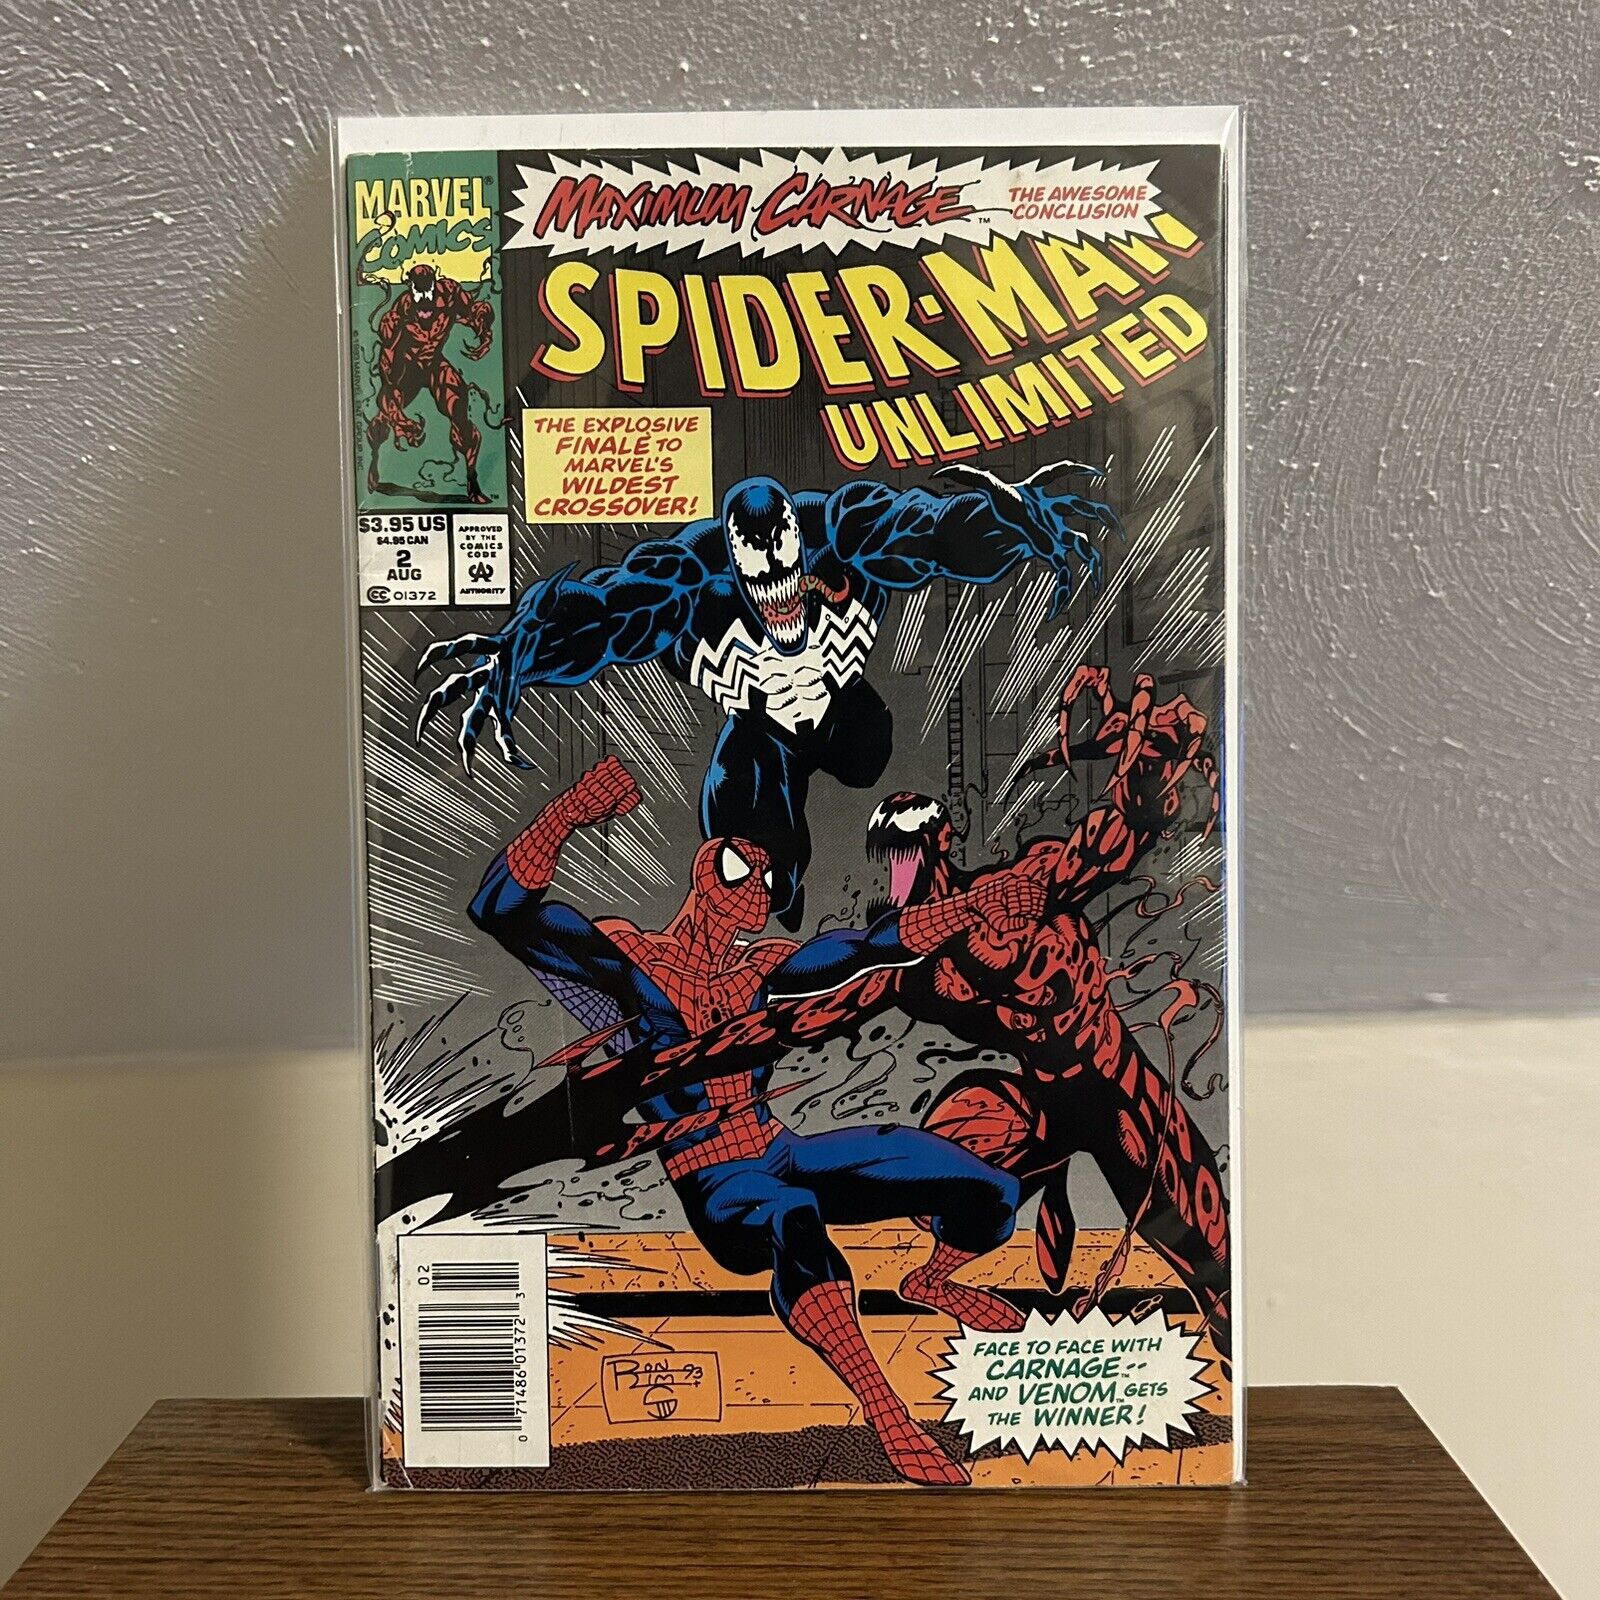 Spider-Man Unlimited #2 (1993) Newsstand High Grade • Maximum Carnage Concludes